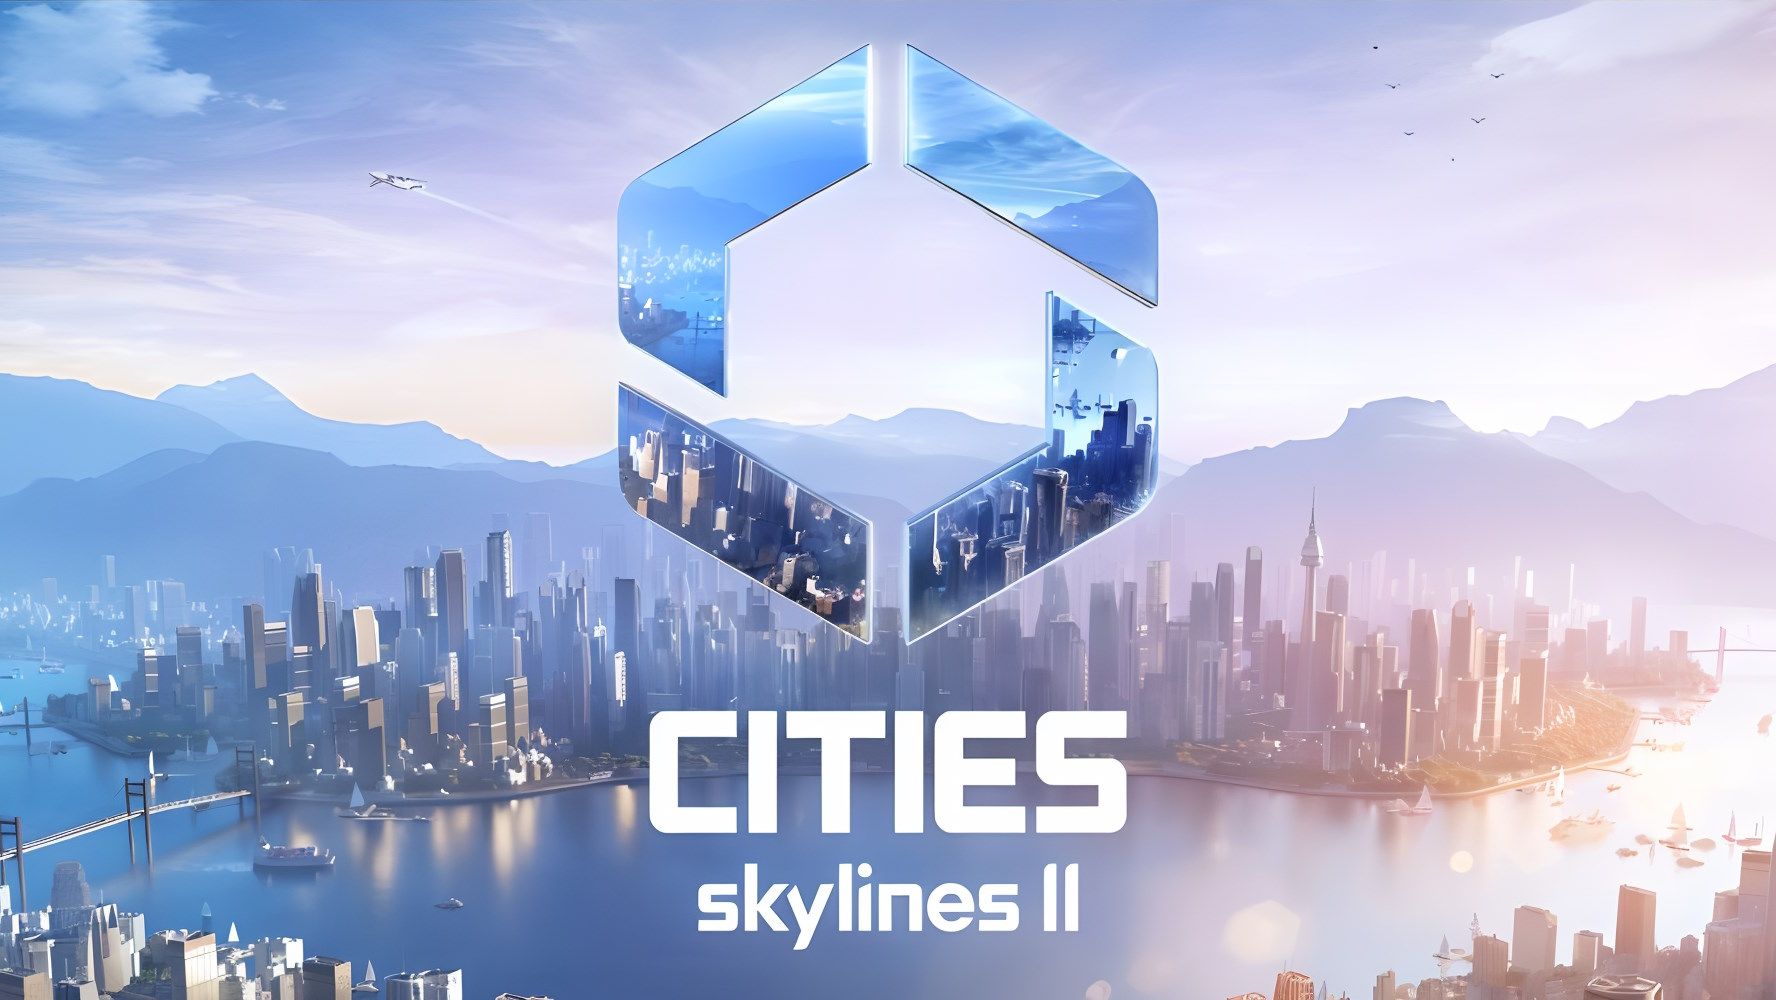 Is It Worth Getting Cities: Skylines 2 Right Now? - Answered